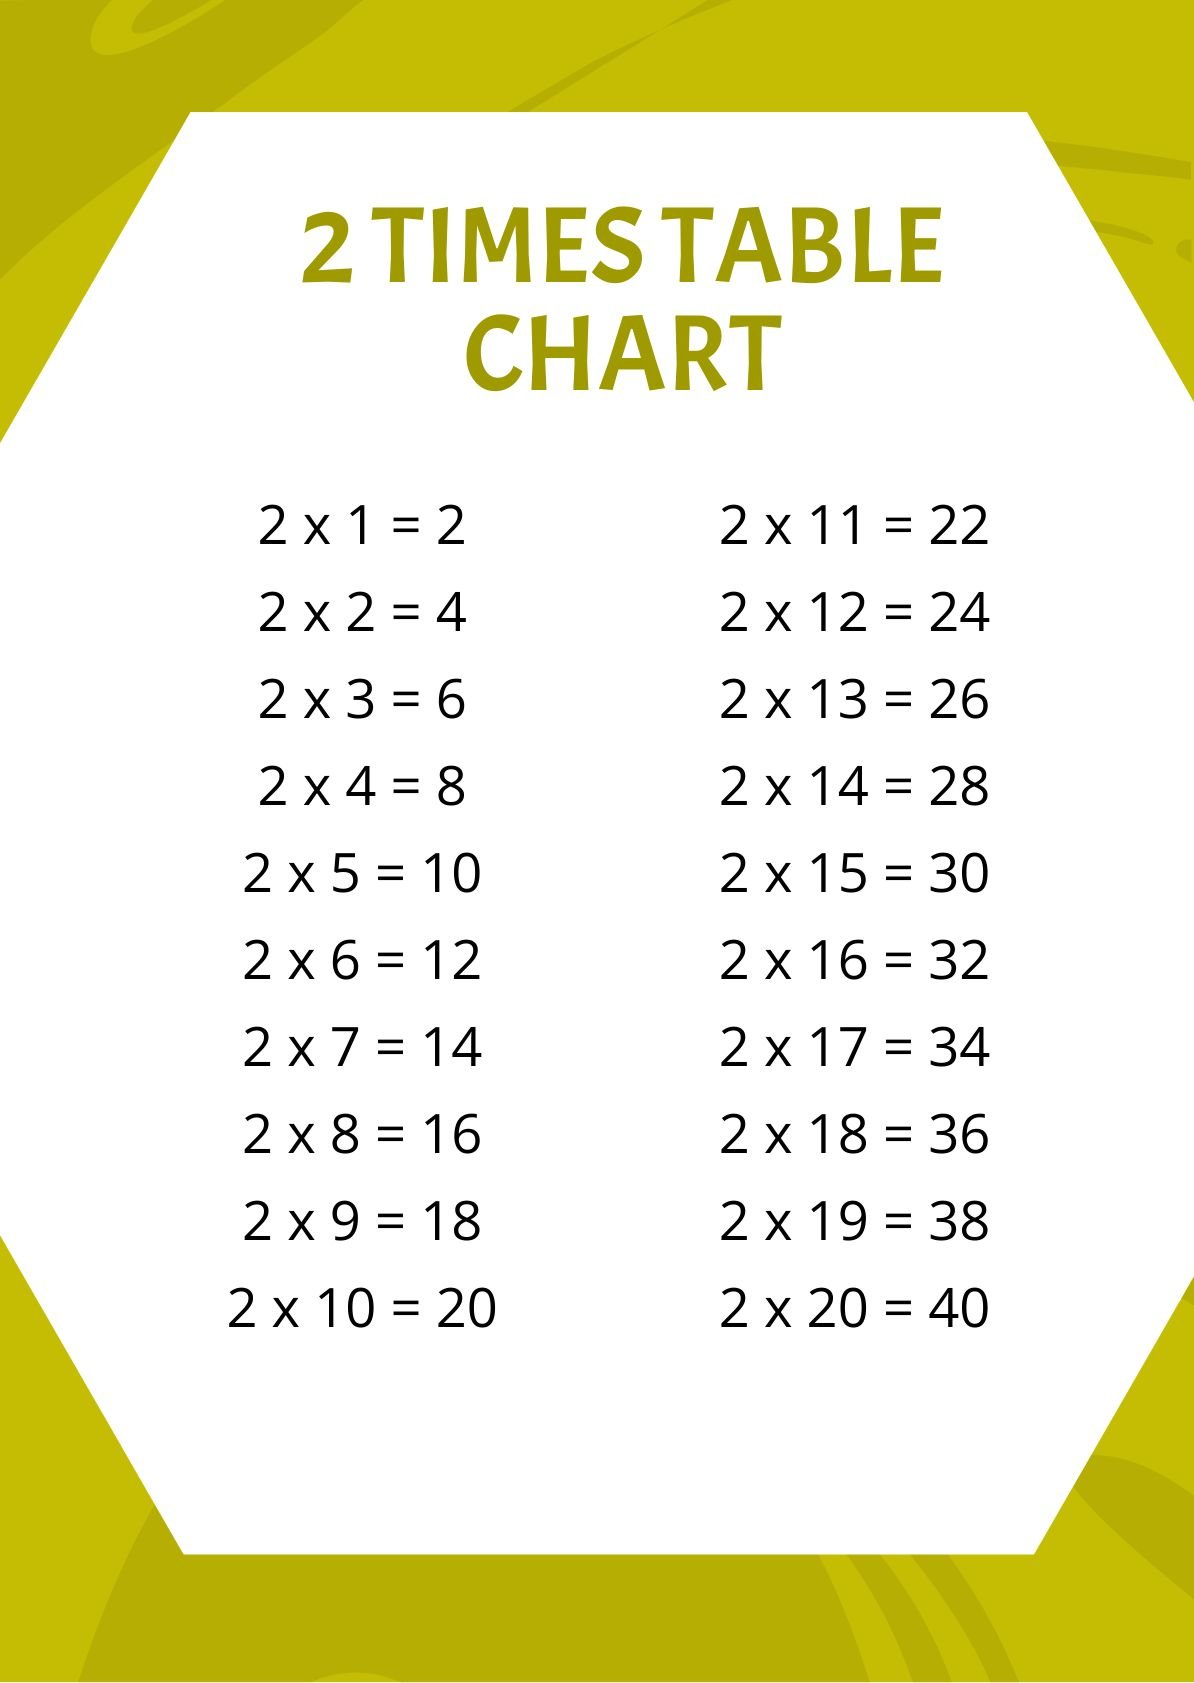 12 Times Table Chart Pdf Two Birds Home